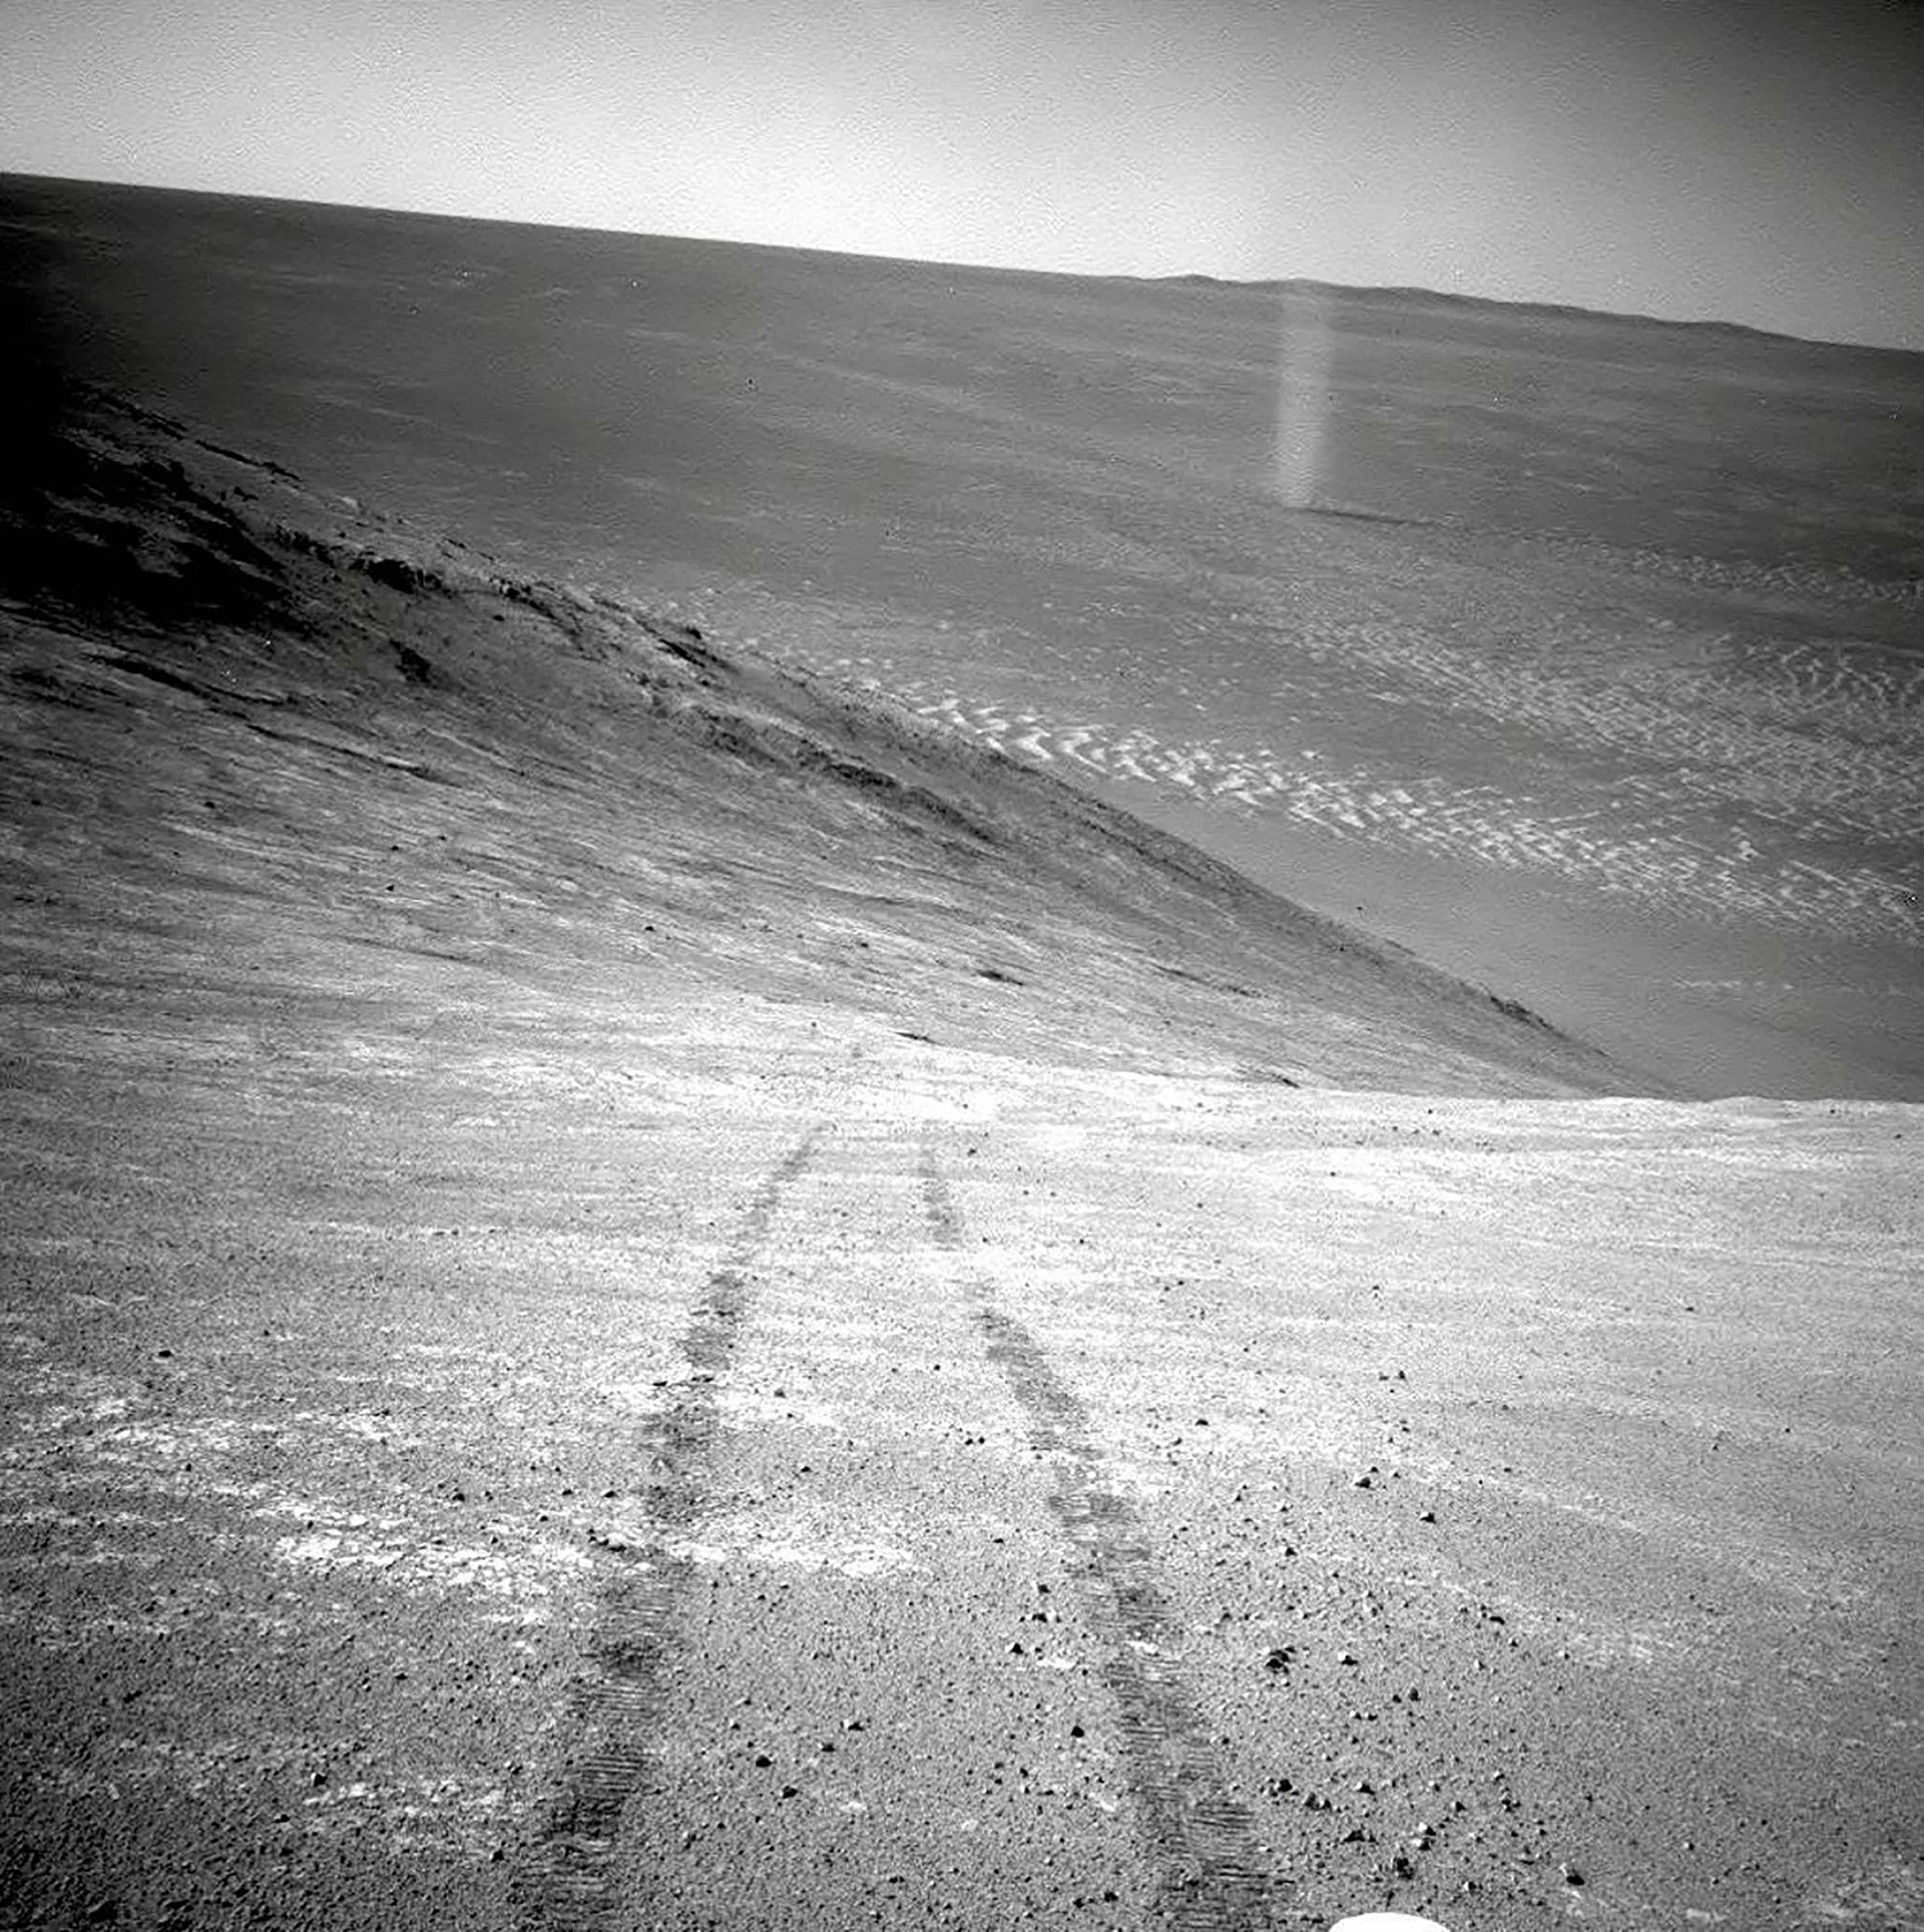 This photograph made available by NASA in March 2016 shows a dust devil in a valley on Mars, seen by the Opportunity rover perched on a ridge. The view looks back at the rover's tracks leading up the north-facing slope of "Knudsen Ridge." (AP/Shutterstock)